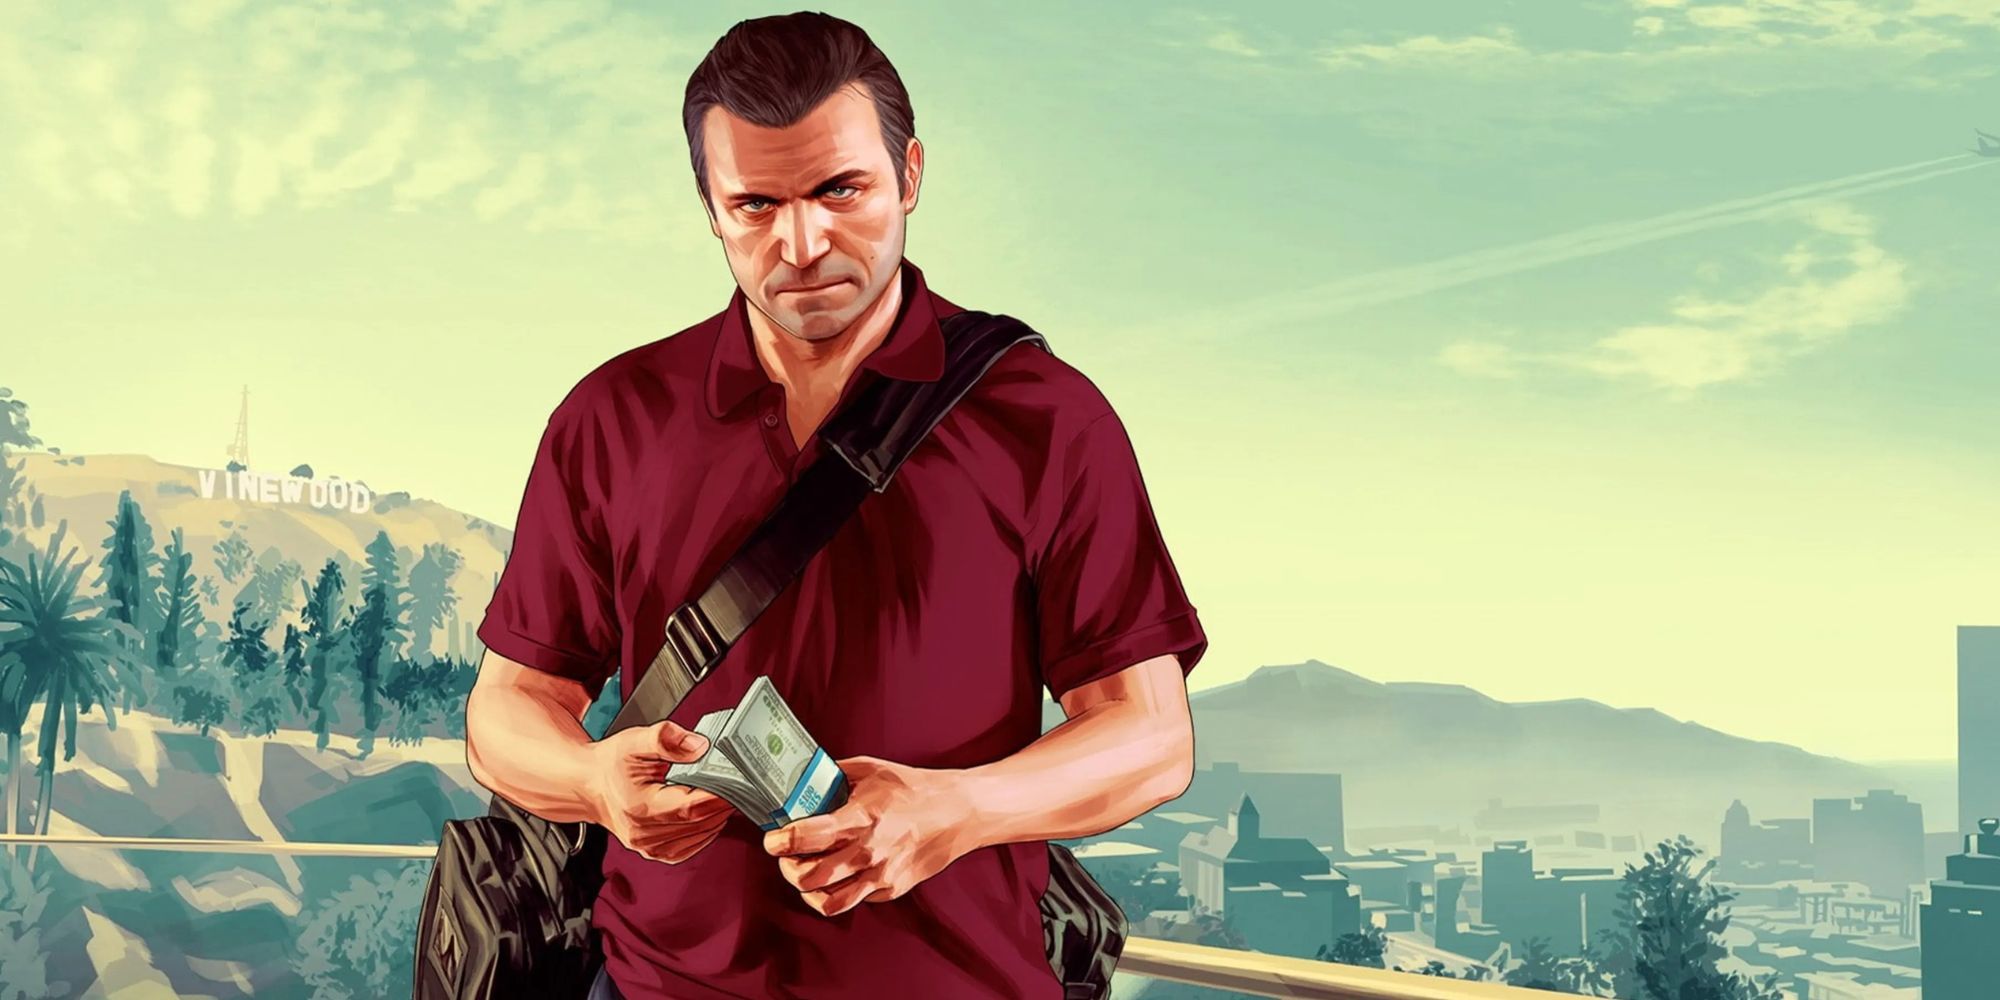 Michael de Santa from GTA 5. He stands in front of a city landscape and has dollar bills in his hand